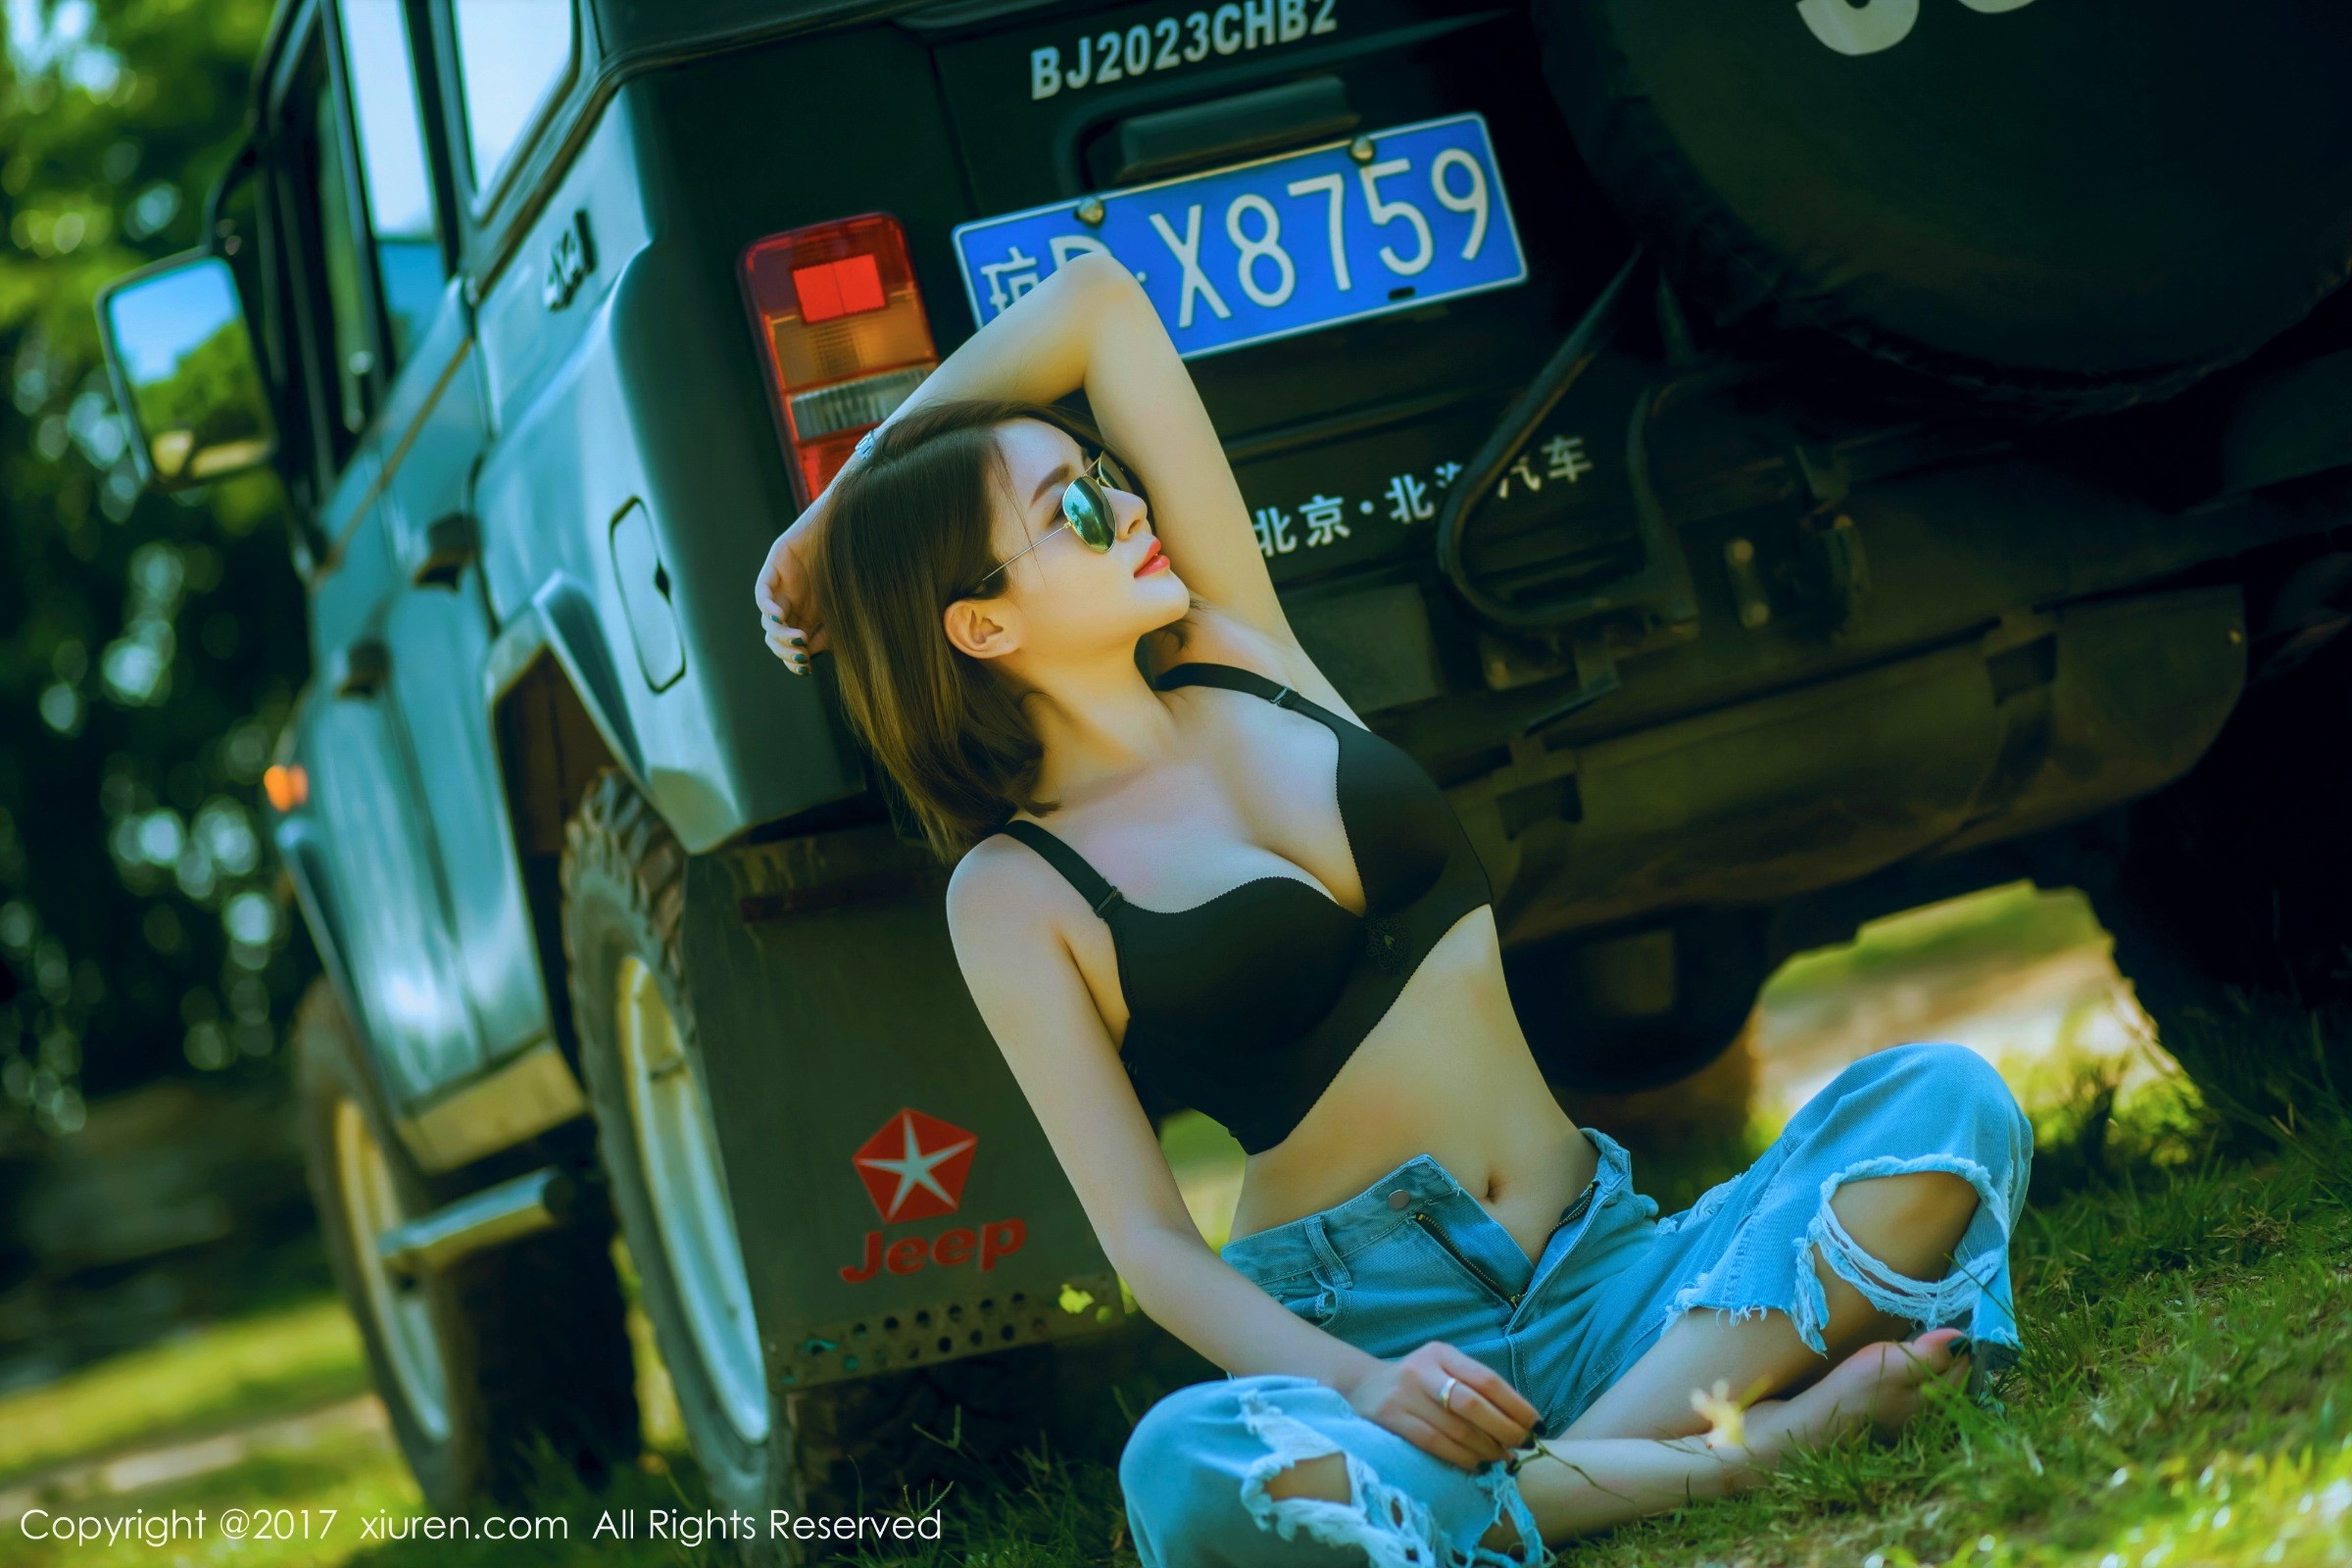 People 2400x1600 Asian black bras arms up women outdoors women with glasses torn clothes torn jeans unbuttoned women car